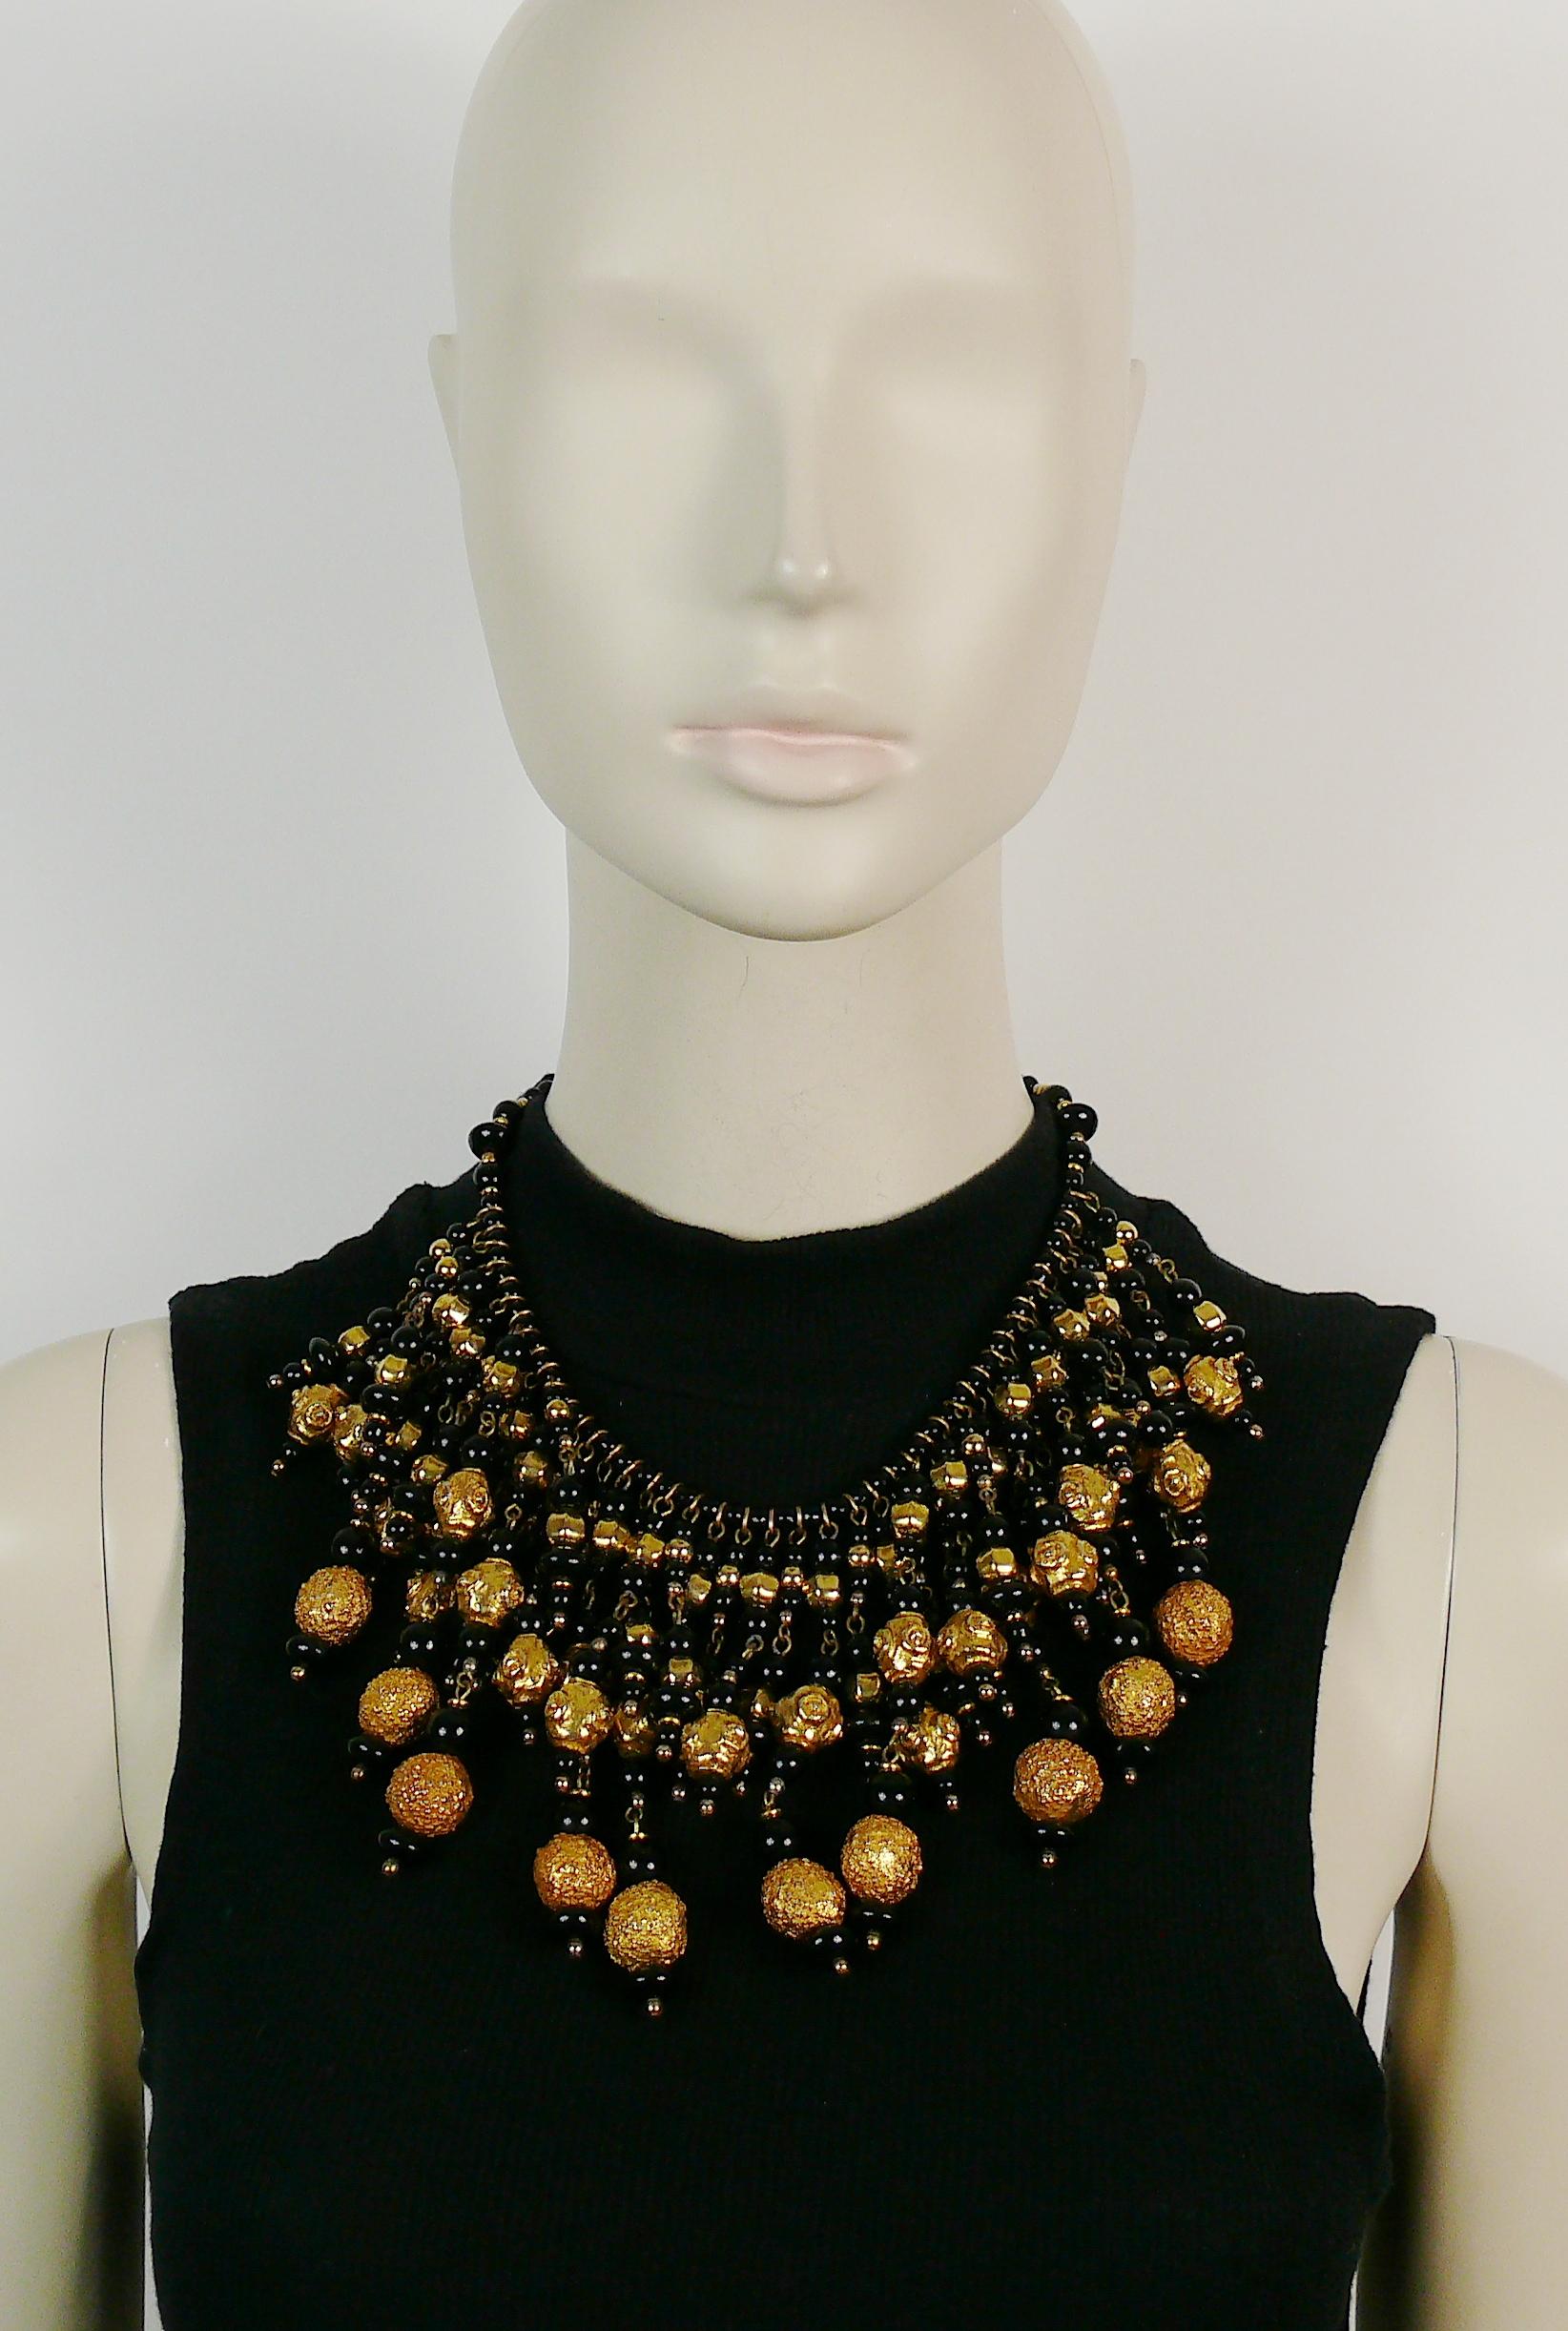 CHRISTIAN LACROIX vintage runway bib necklace featuring graduated black glass beads and textured gold toned balls.

Lobster clasp closure.

Embossed CHRISTIAN LACROIX CL Made in France.

Indicative measurements : total length approx. 41.5 cm (16.34